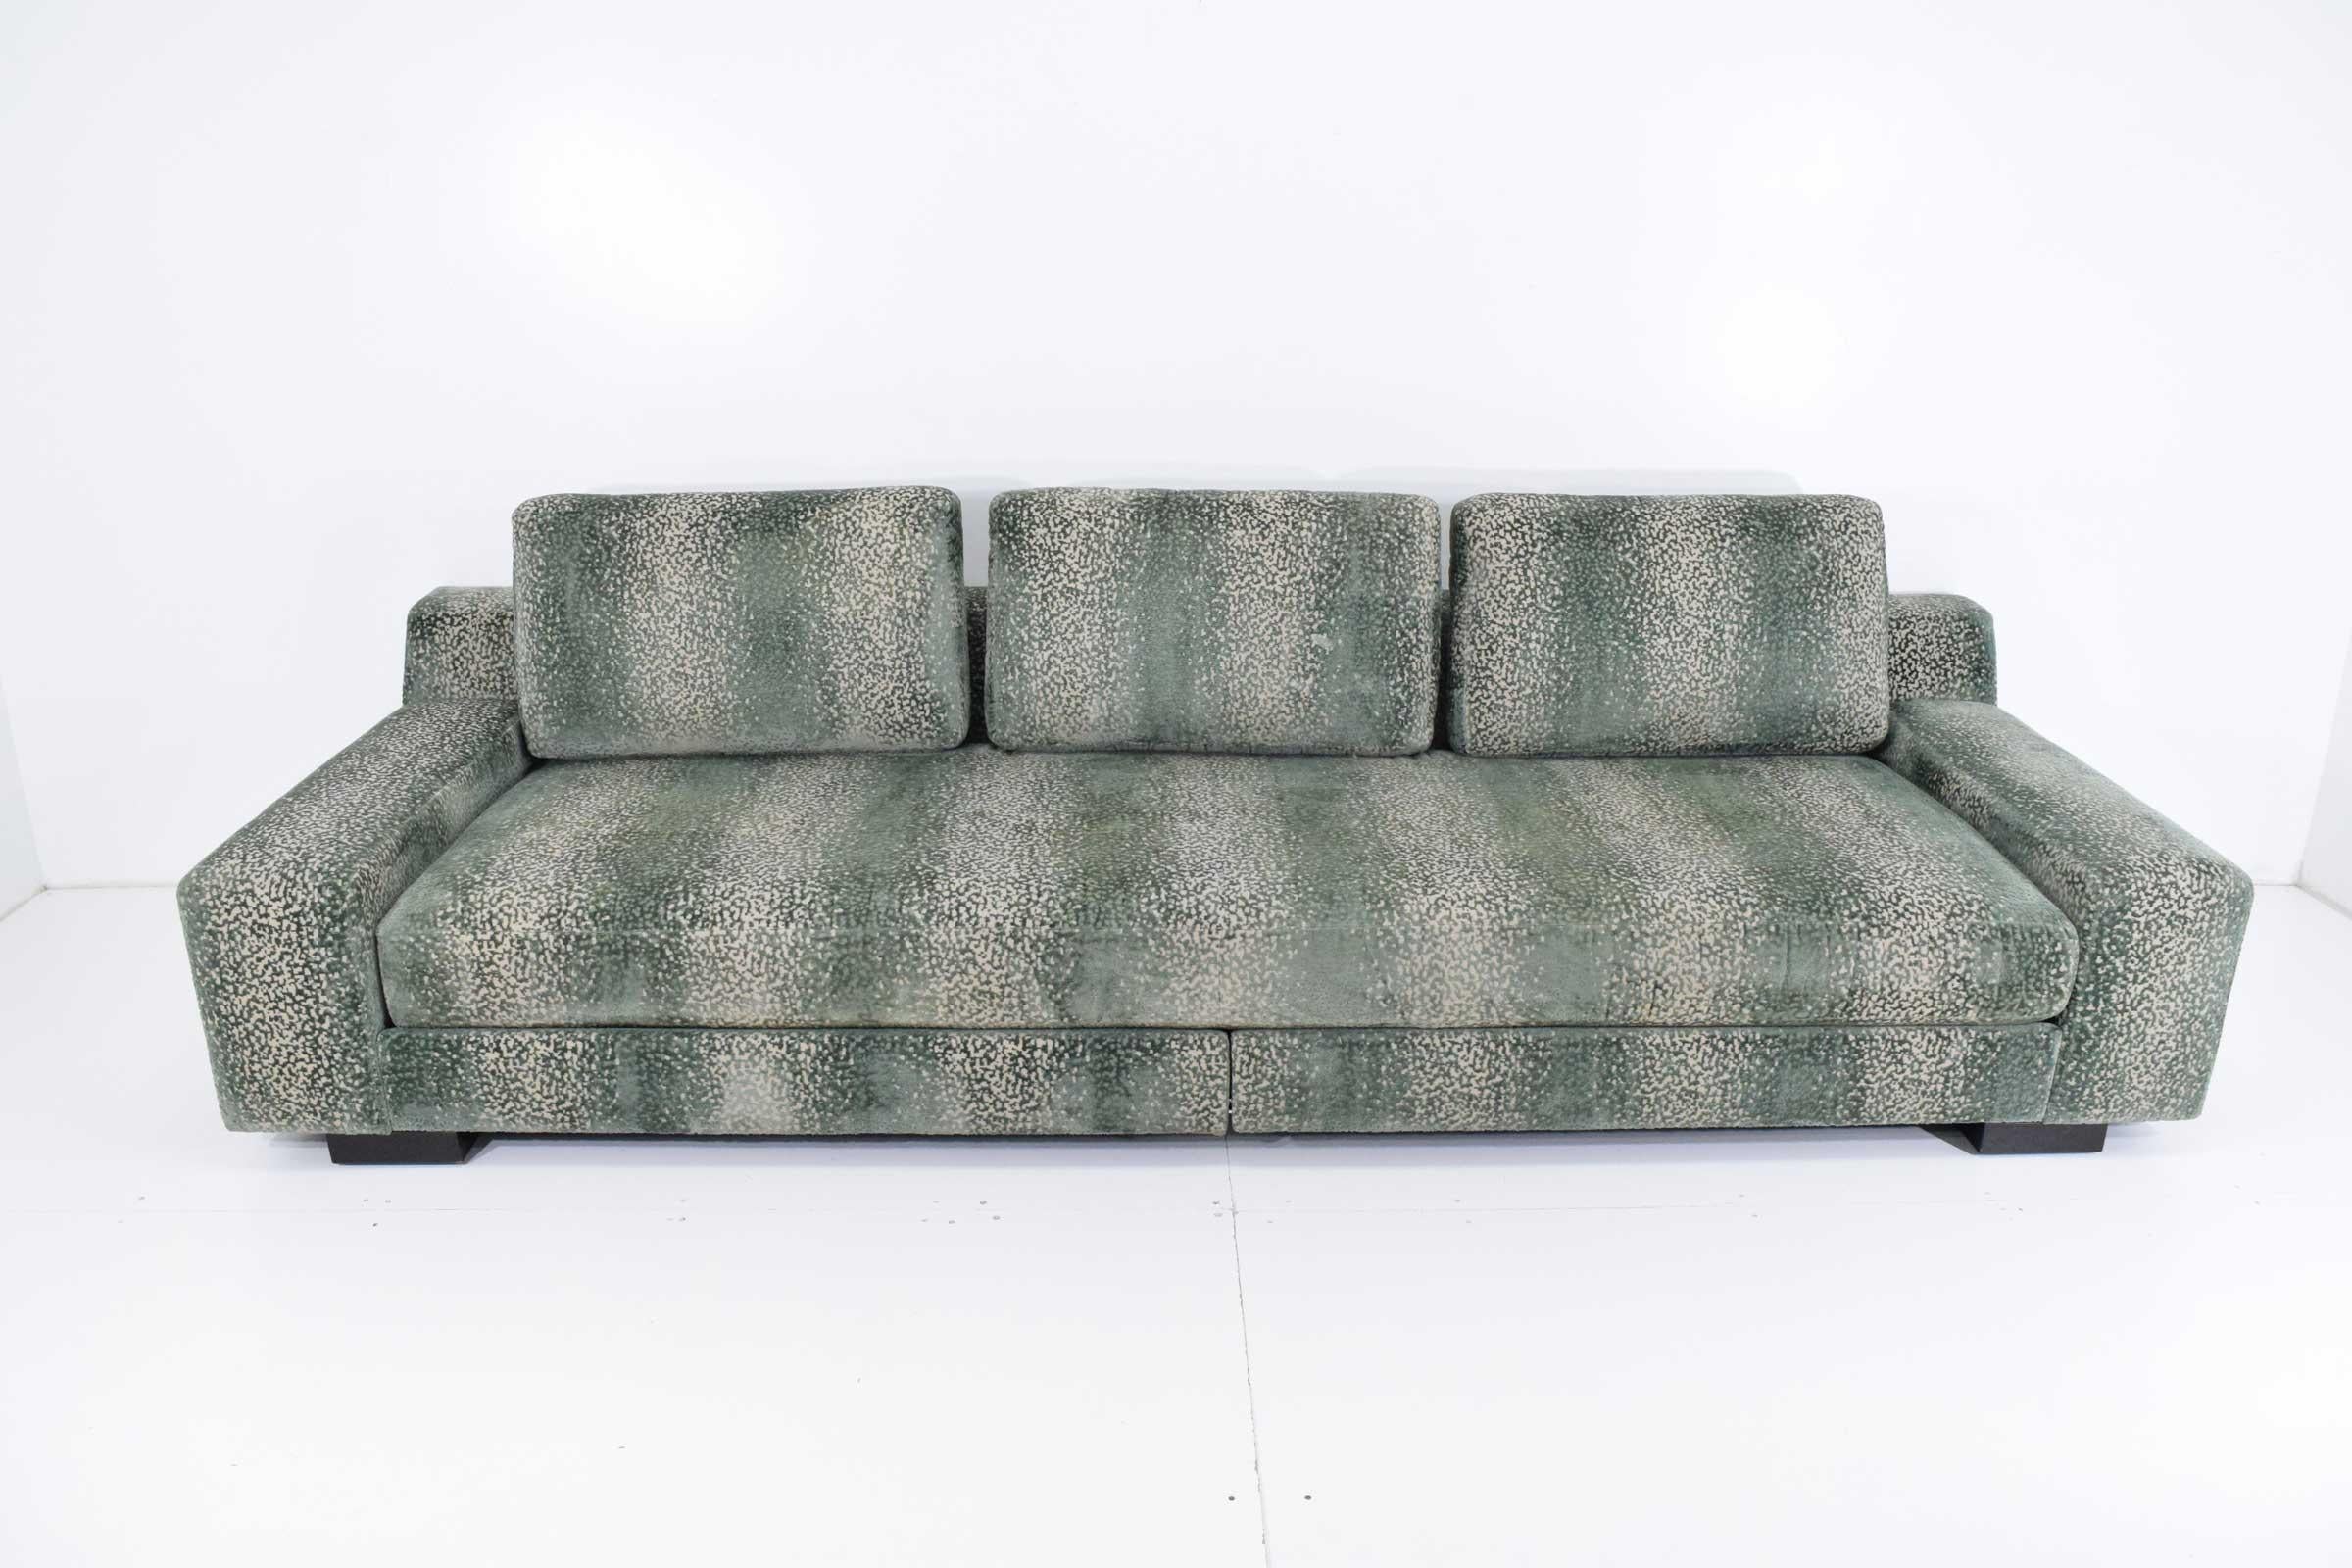 Sofa is 10' long, beautiful hi-quality cut velvet. Includes five extra throw pillows. Please see images.